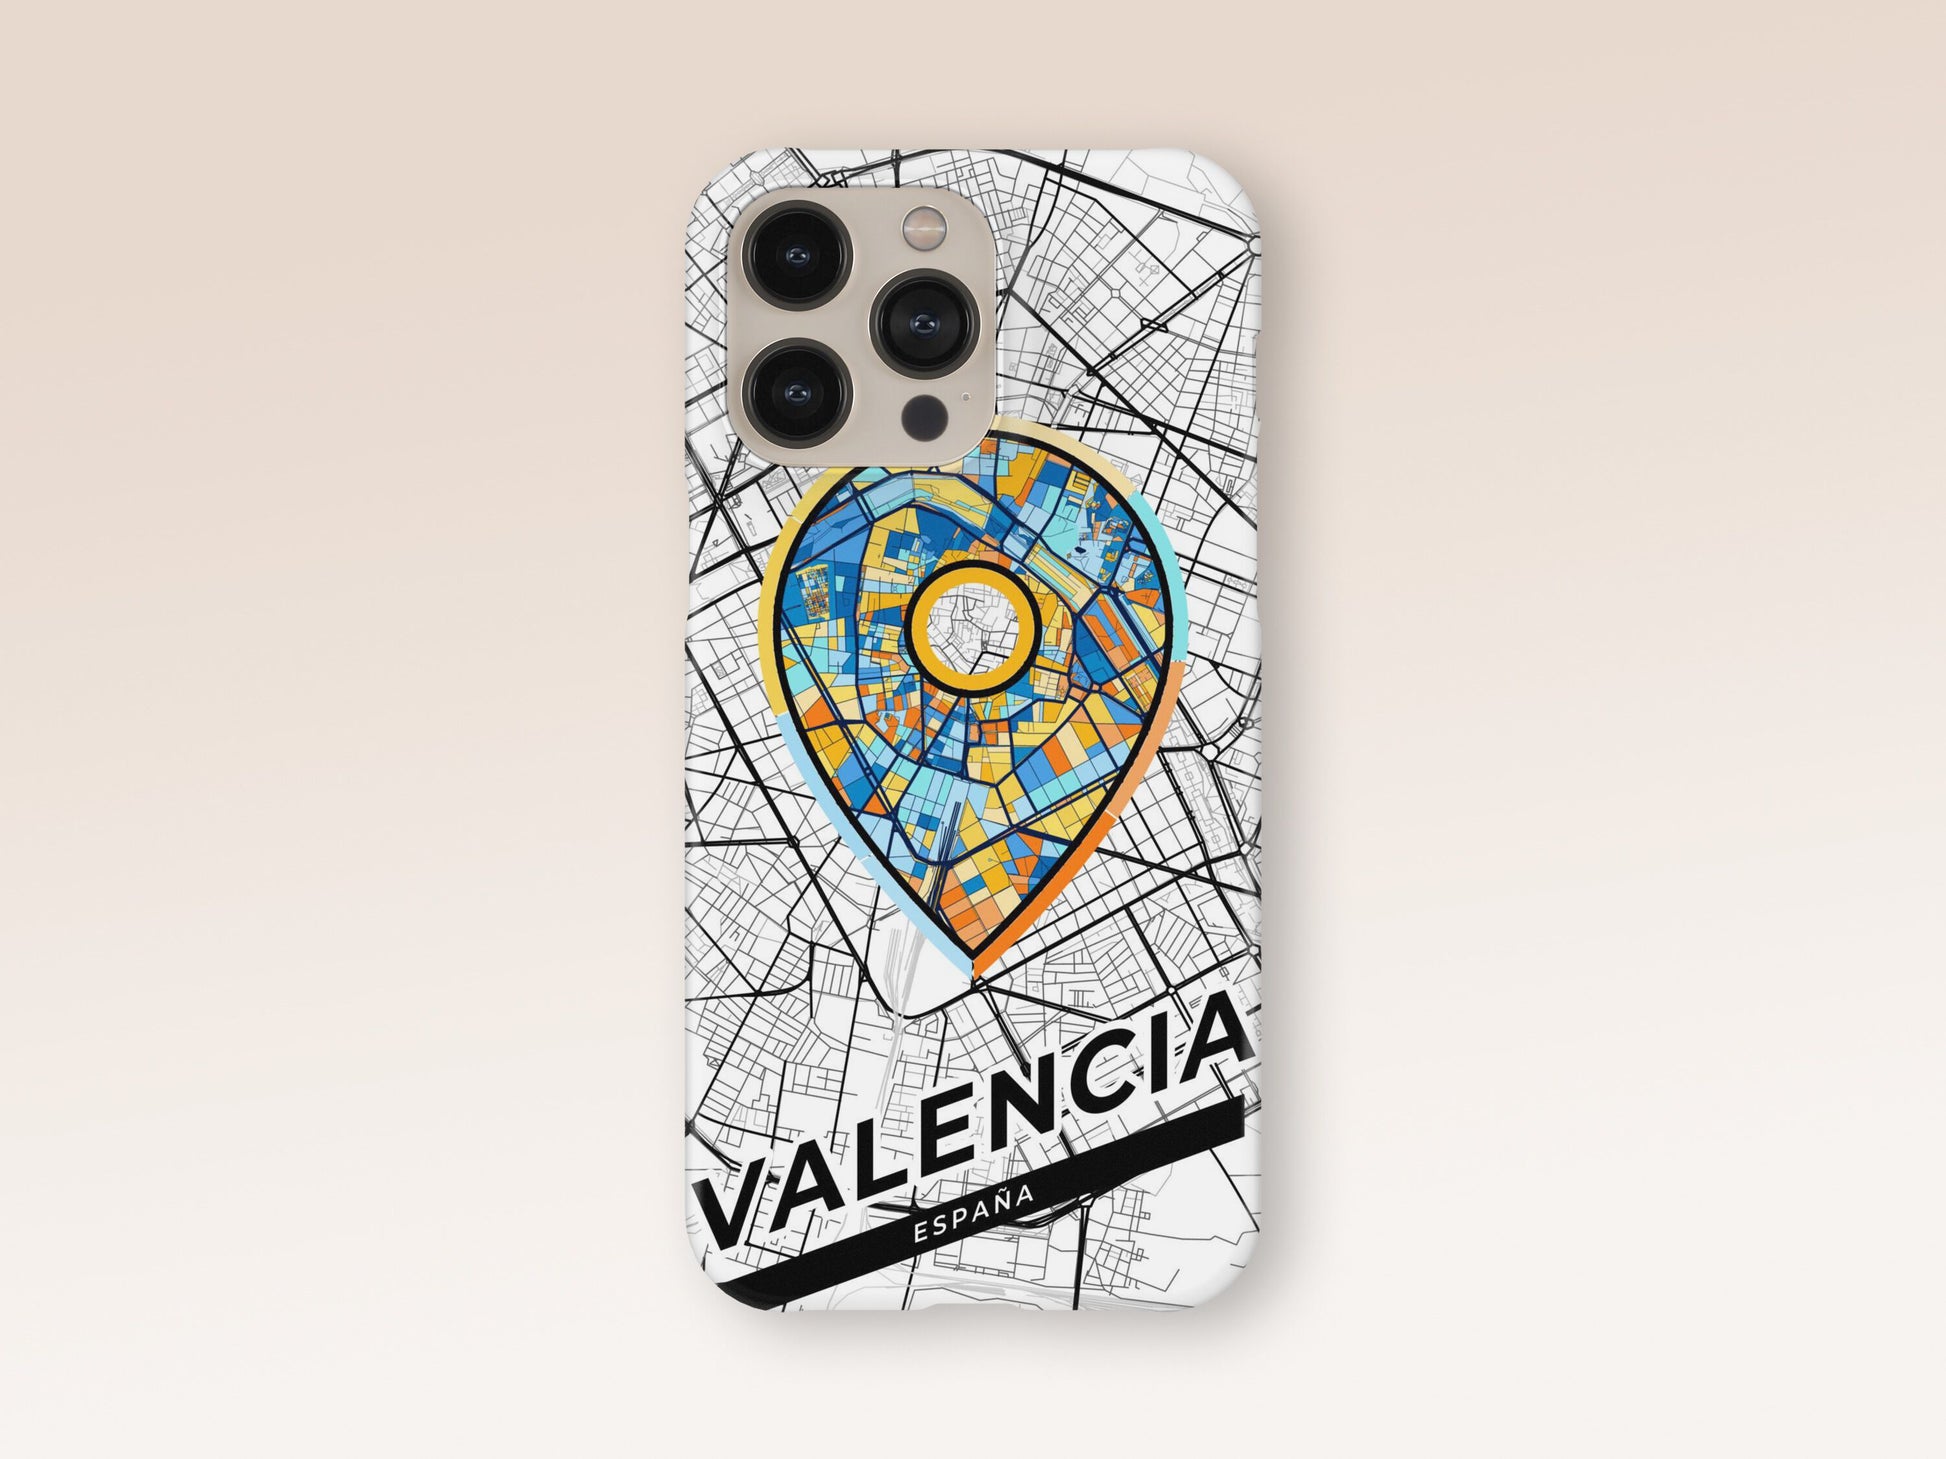 Valencia Spain slim phone case with colorful icon 1